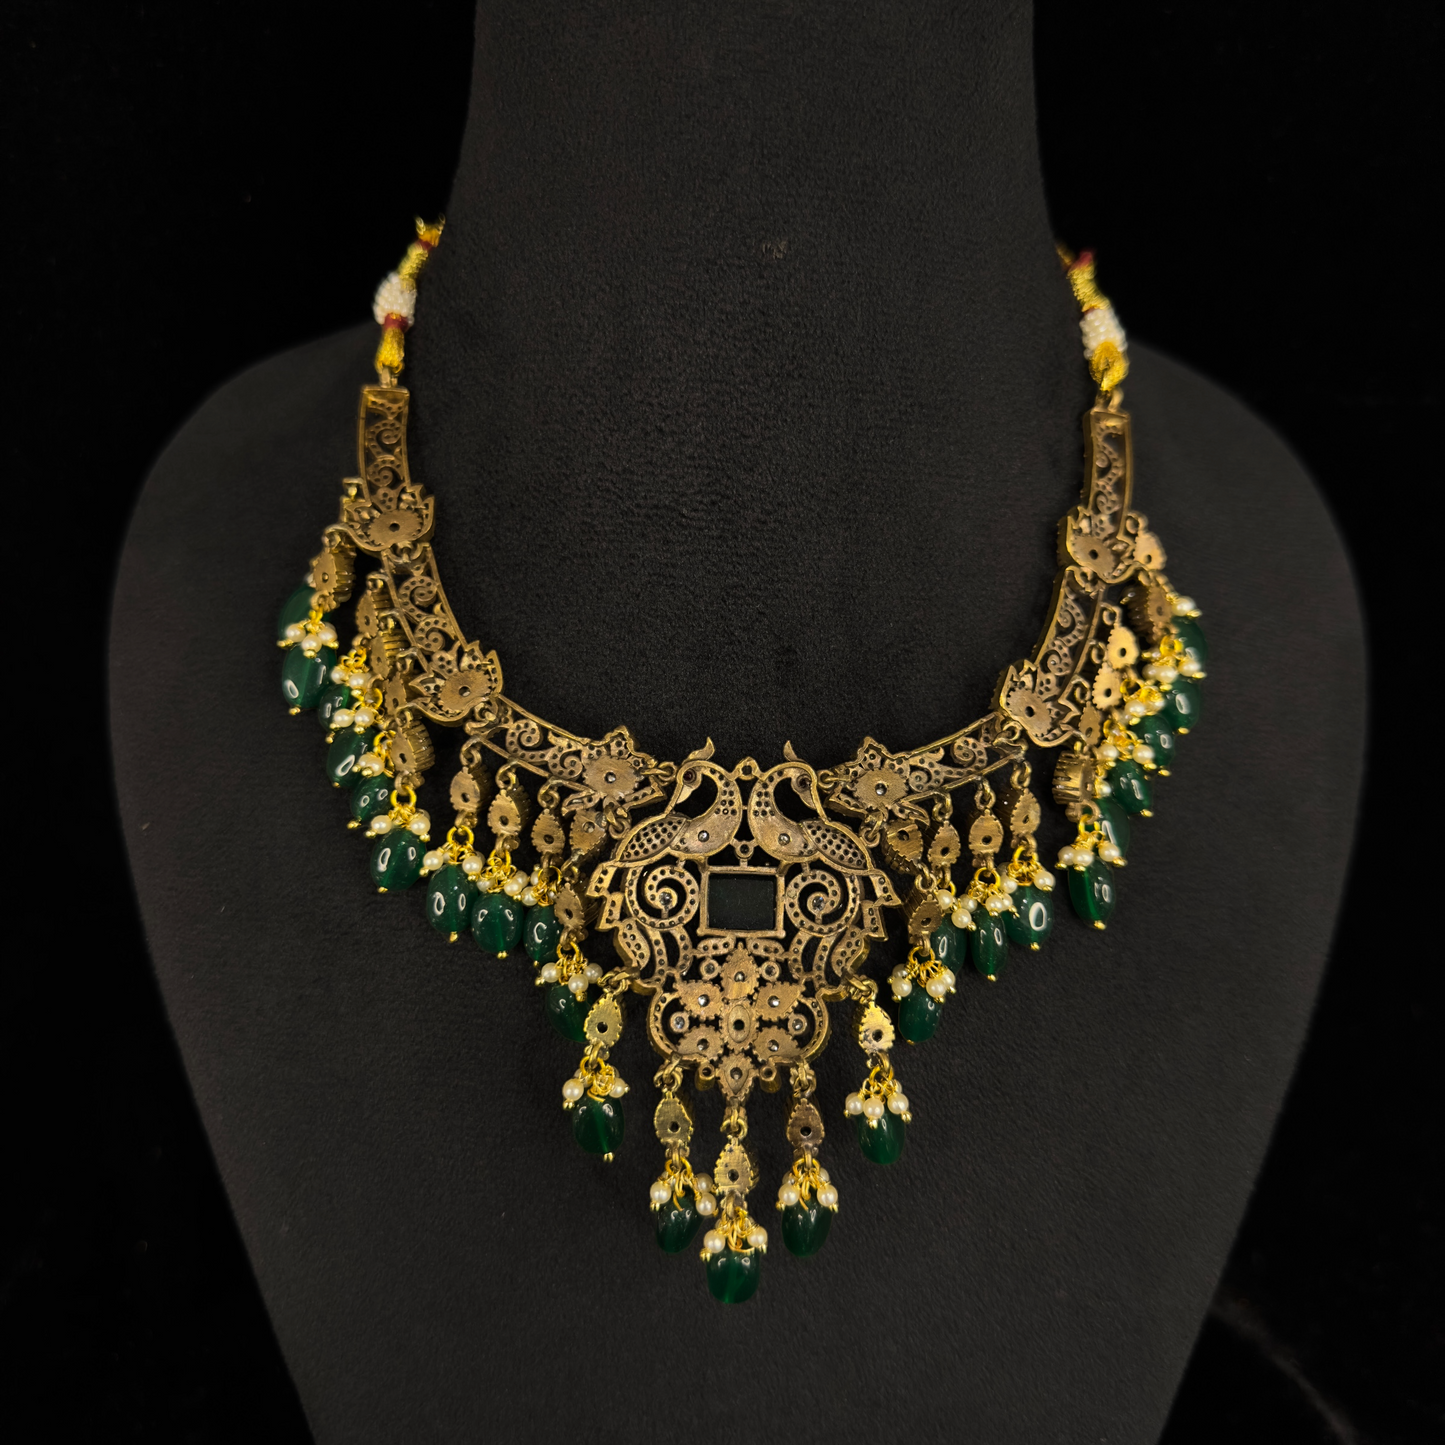 Victorian Peacock Kanti Necklace with matching earrings